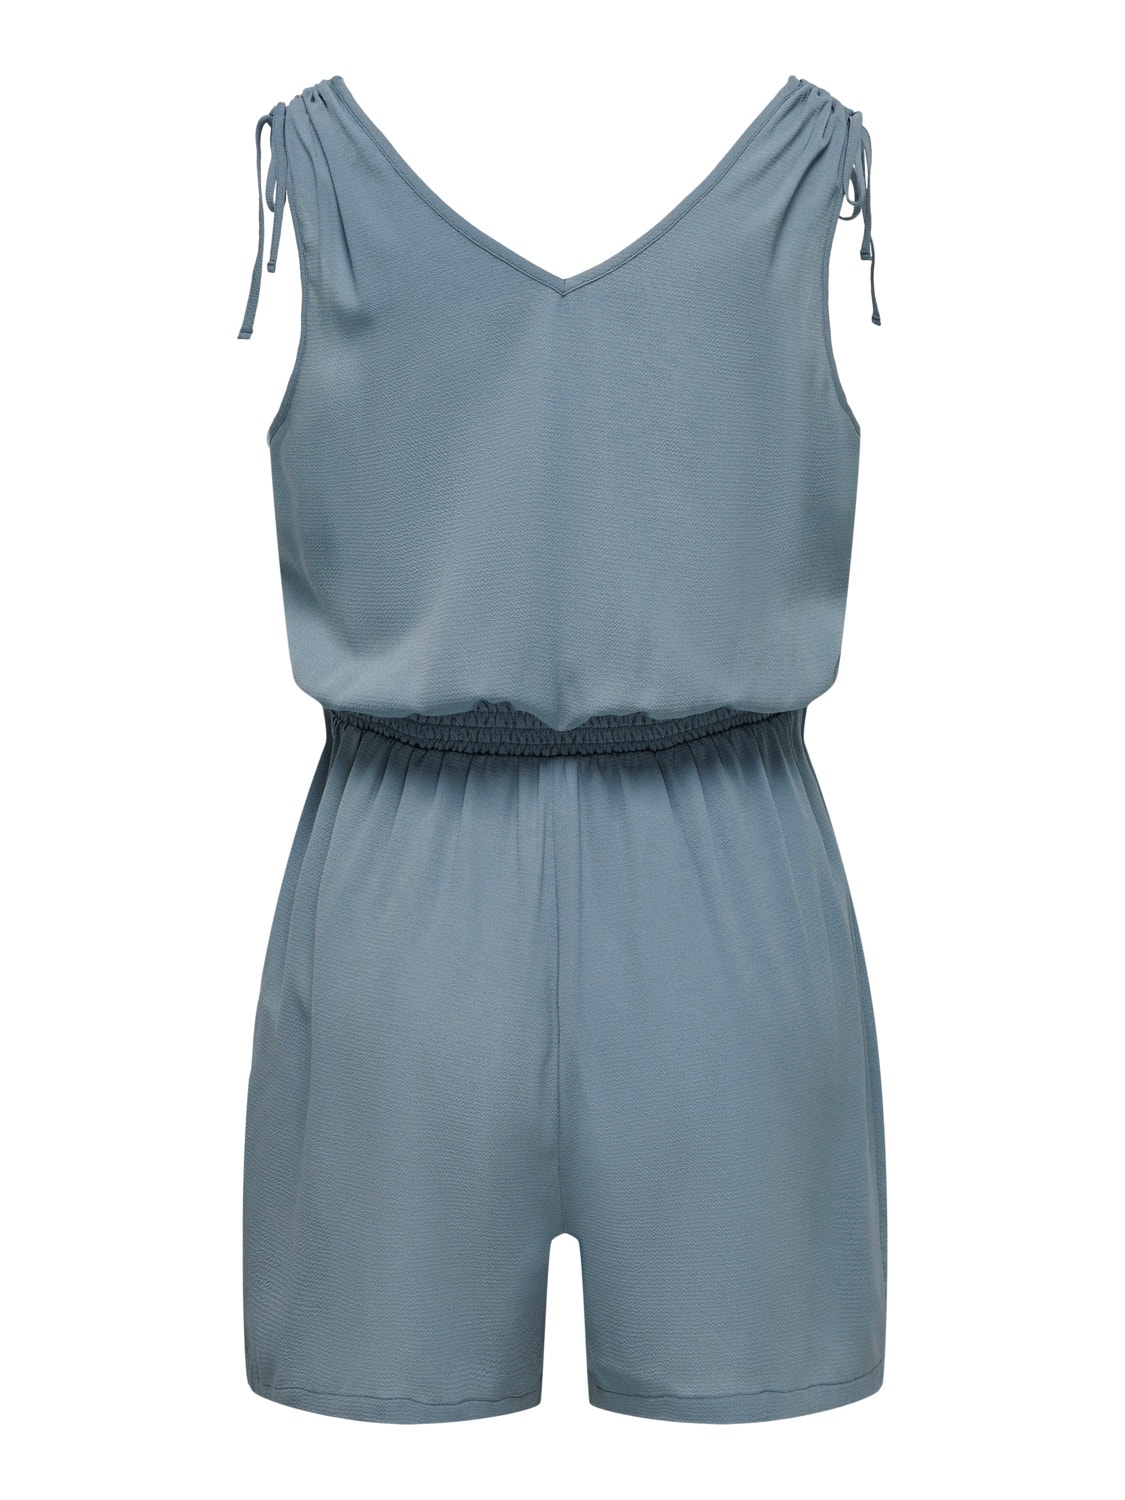 ONLY Playsuit With Elastic Waist -Blue Mirage - 15300899